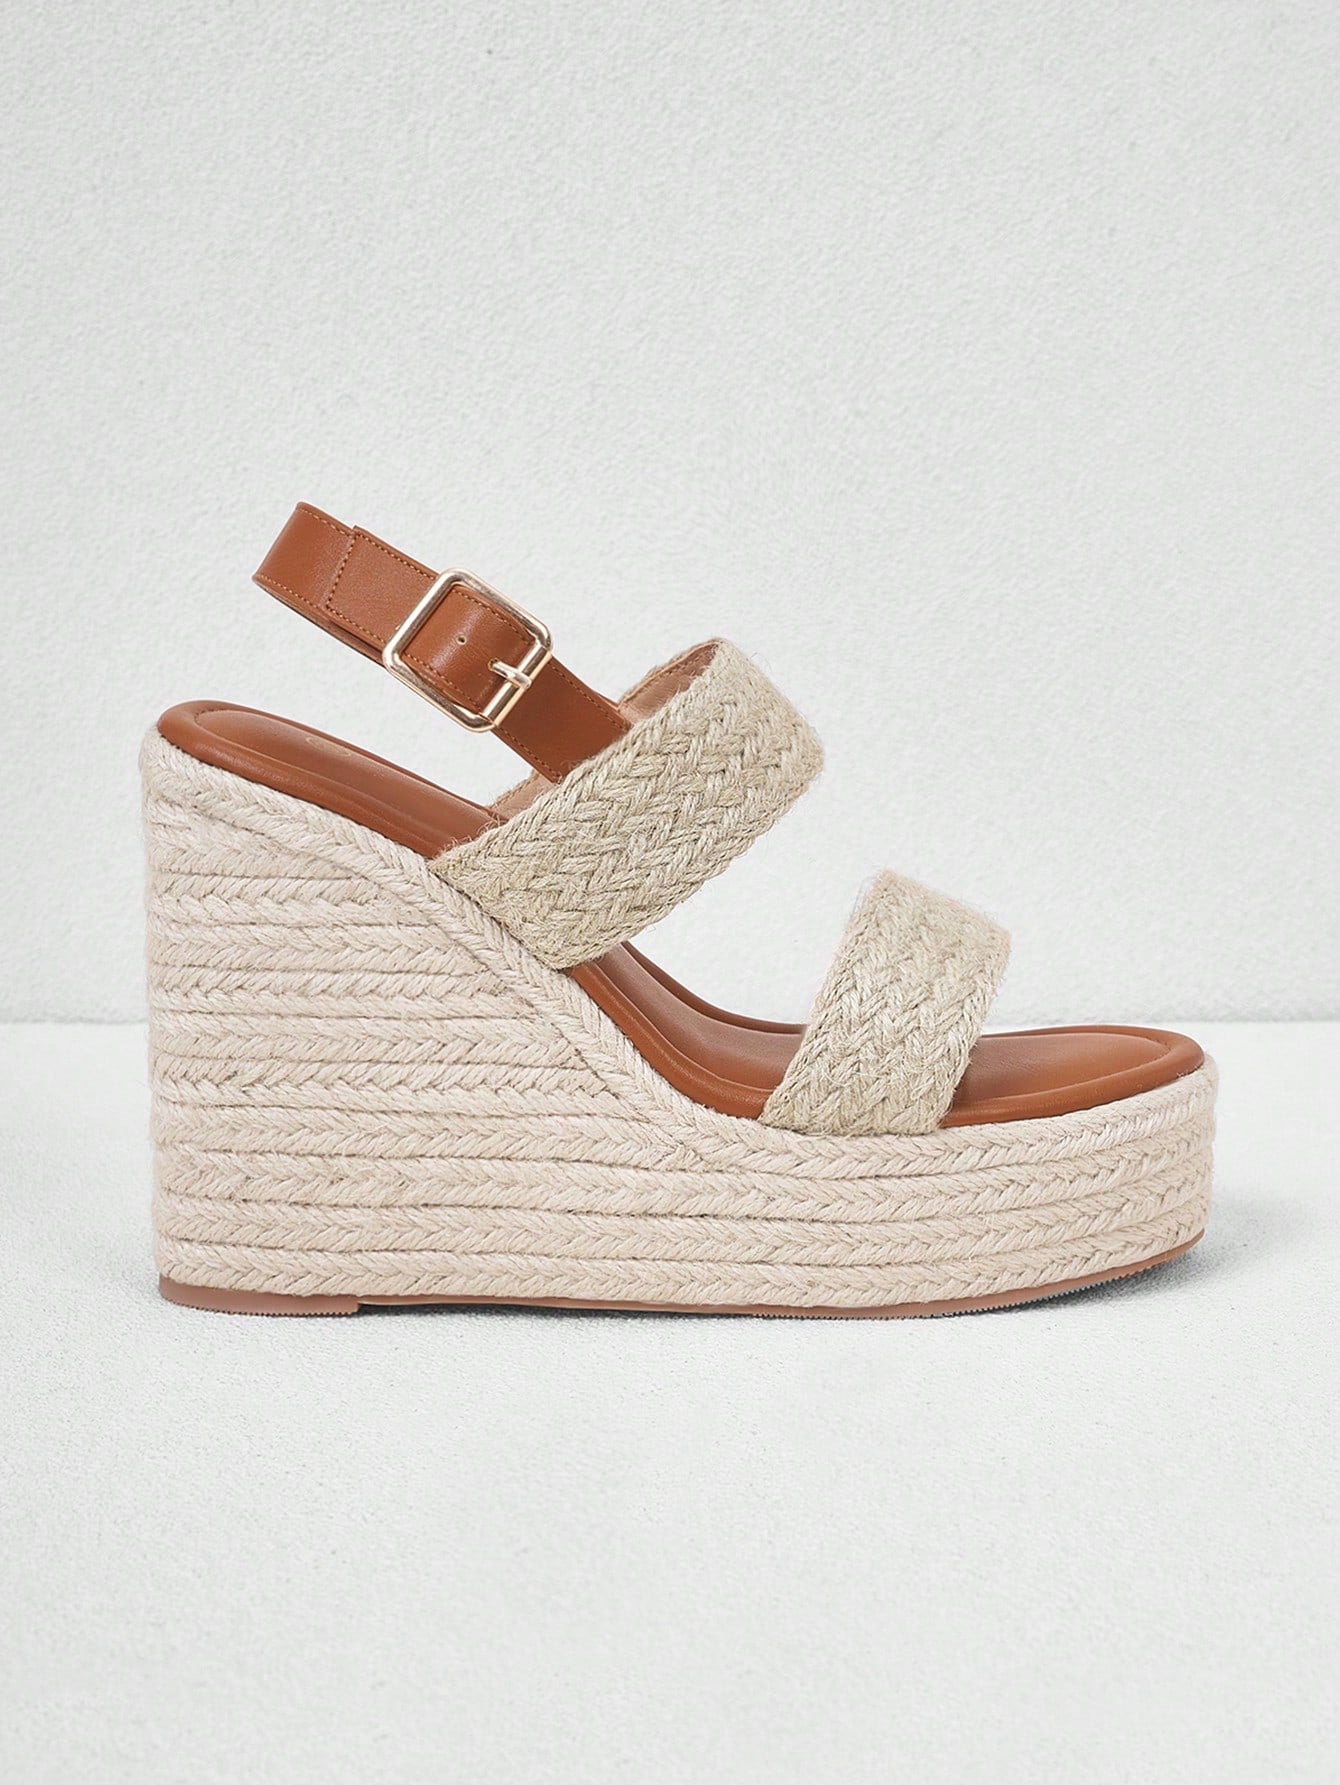 Women's Fashion Spring Summer Retro Braided Wedge Thick Sole Jute Sandals Suitable For Vacation